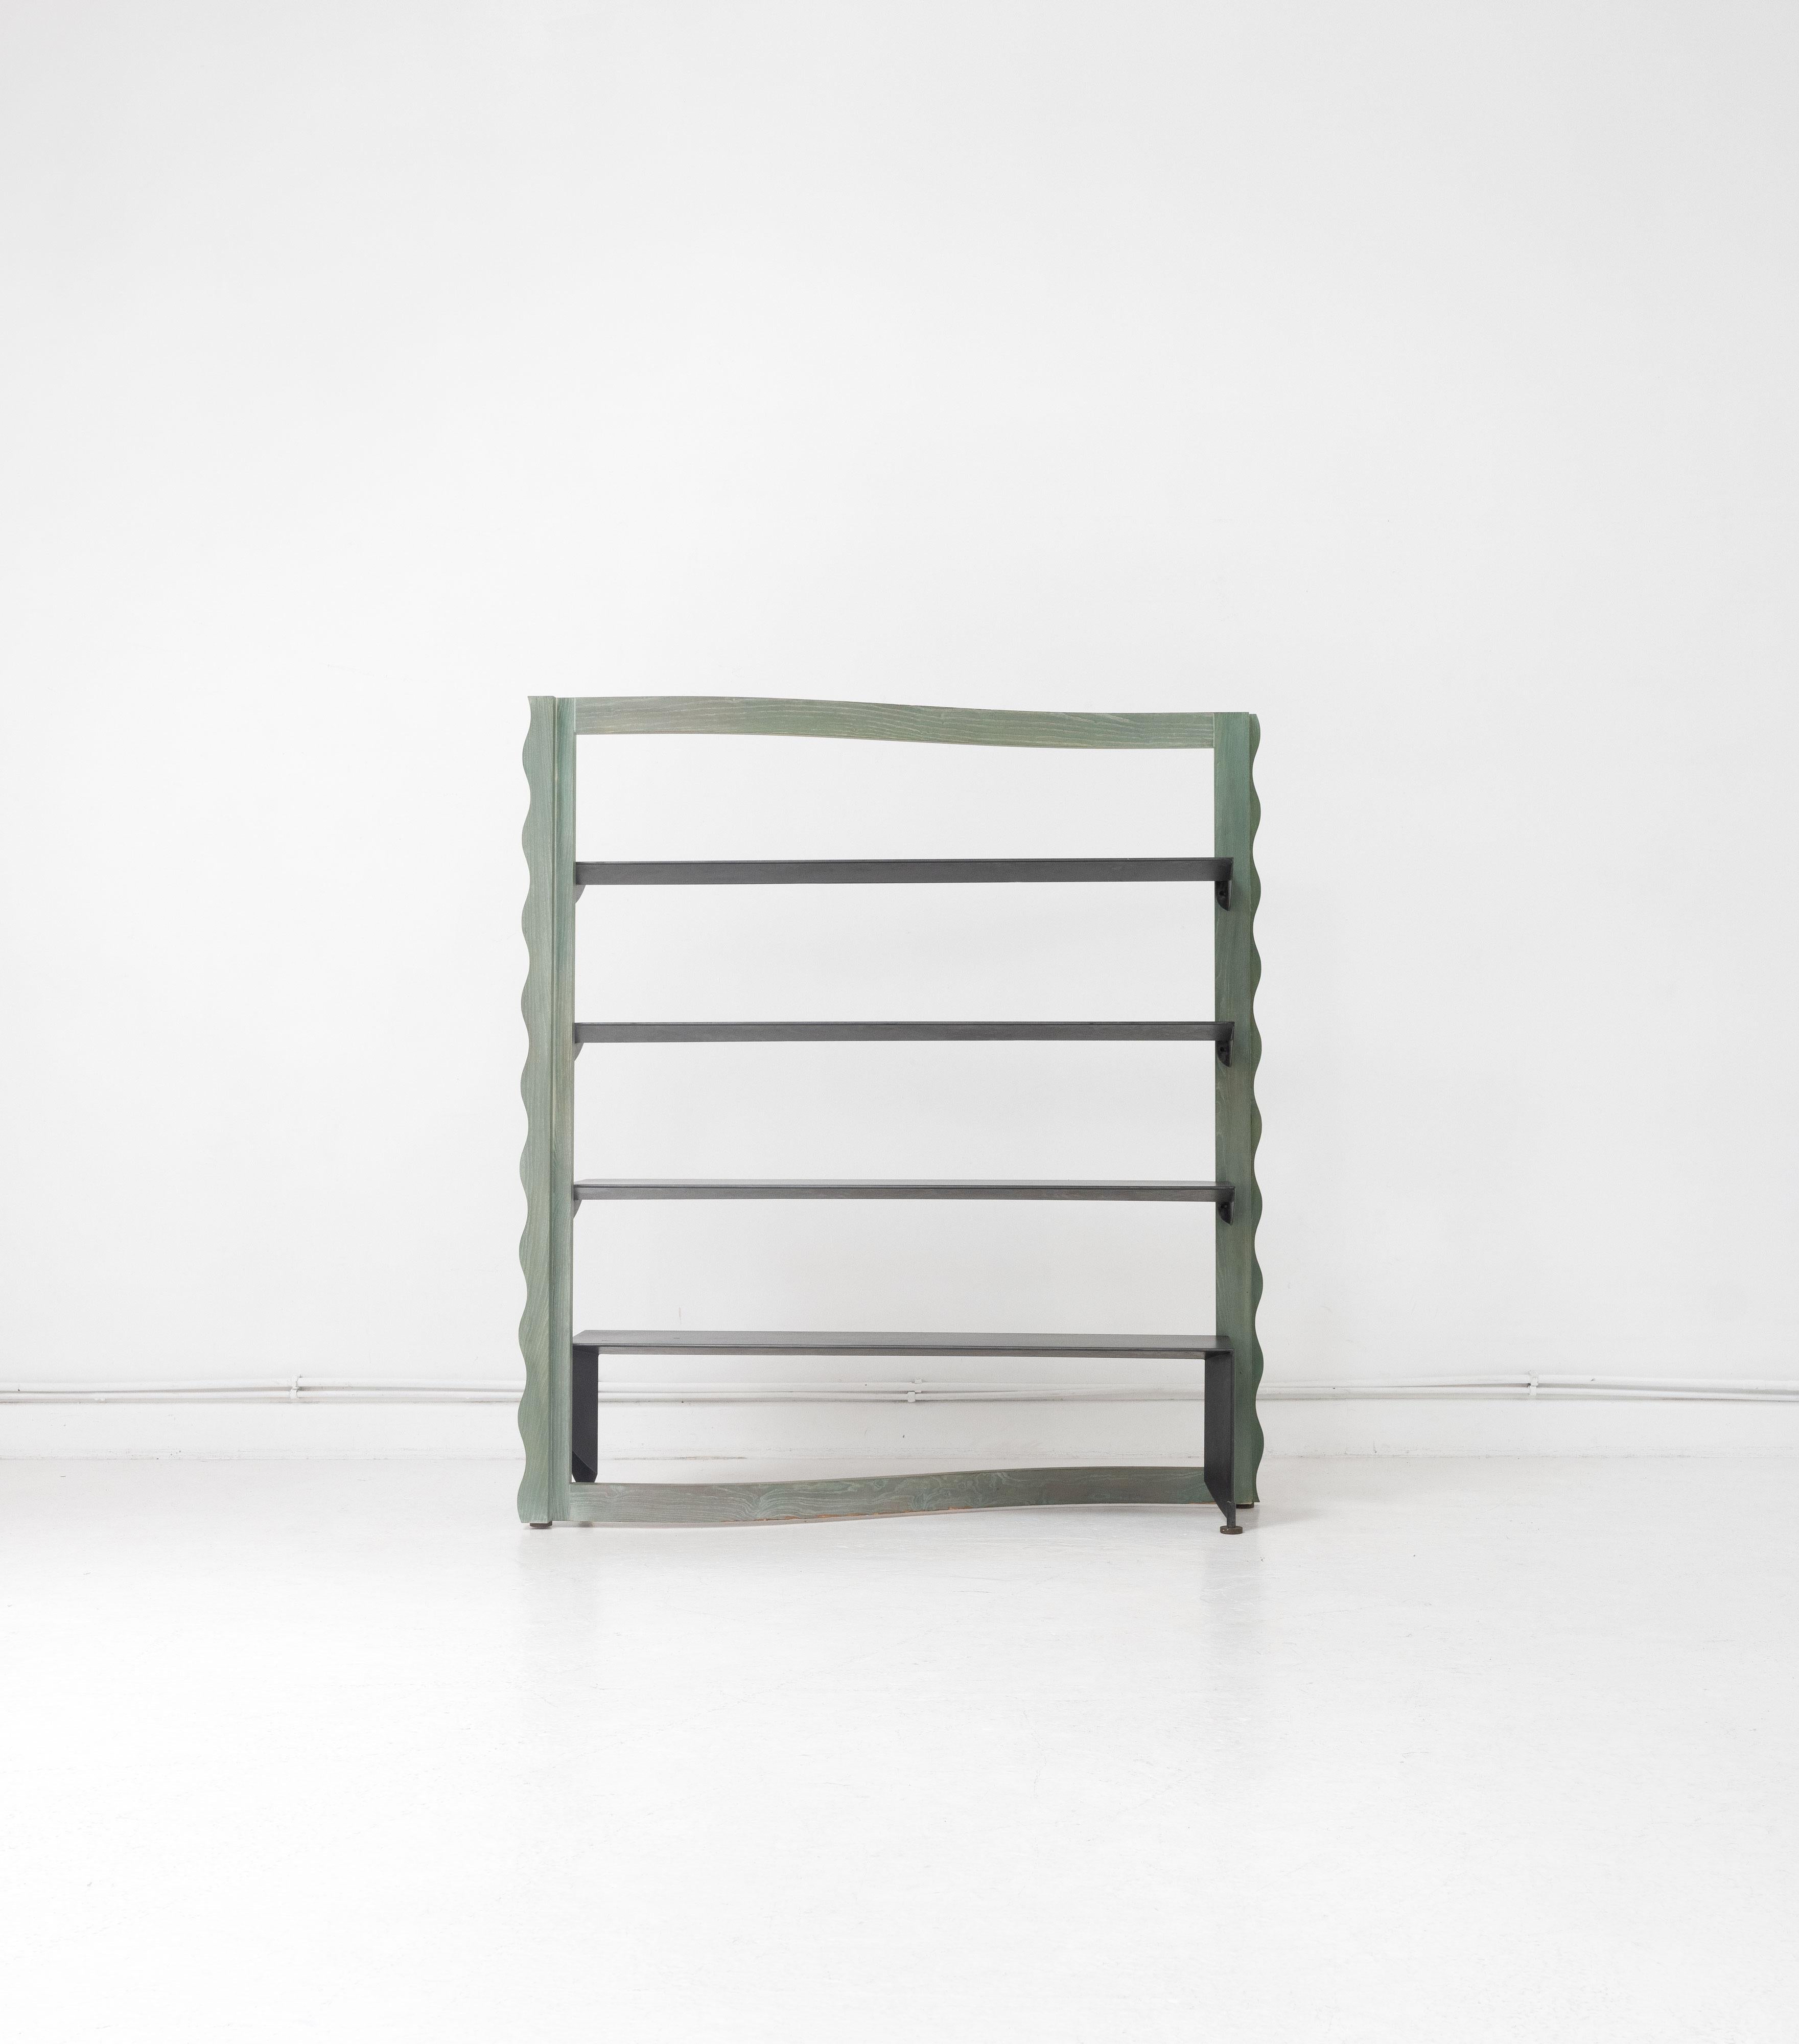 A late 20th Century shelving unit. Composed from a cerused oak frame and removable black steel shelves. Unattributed but potentially Italian taking influence from Memphis Milano. 